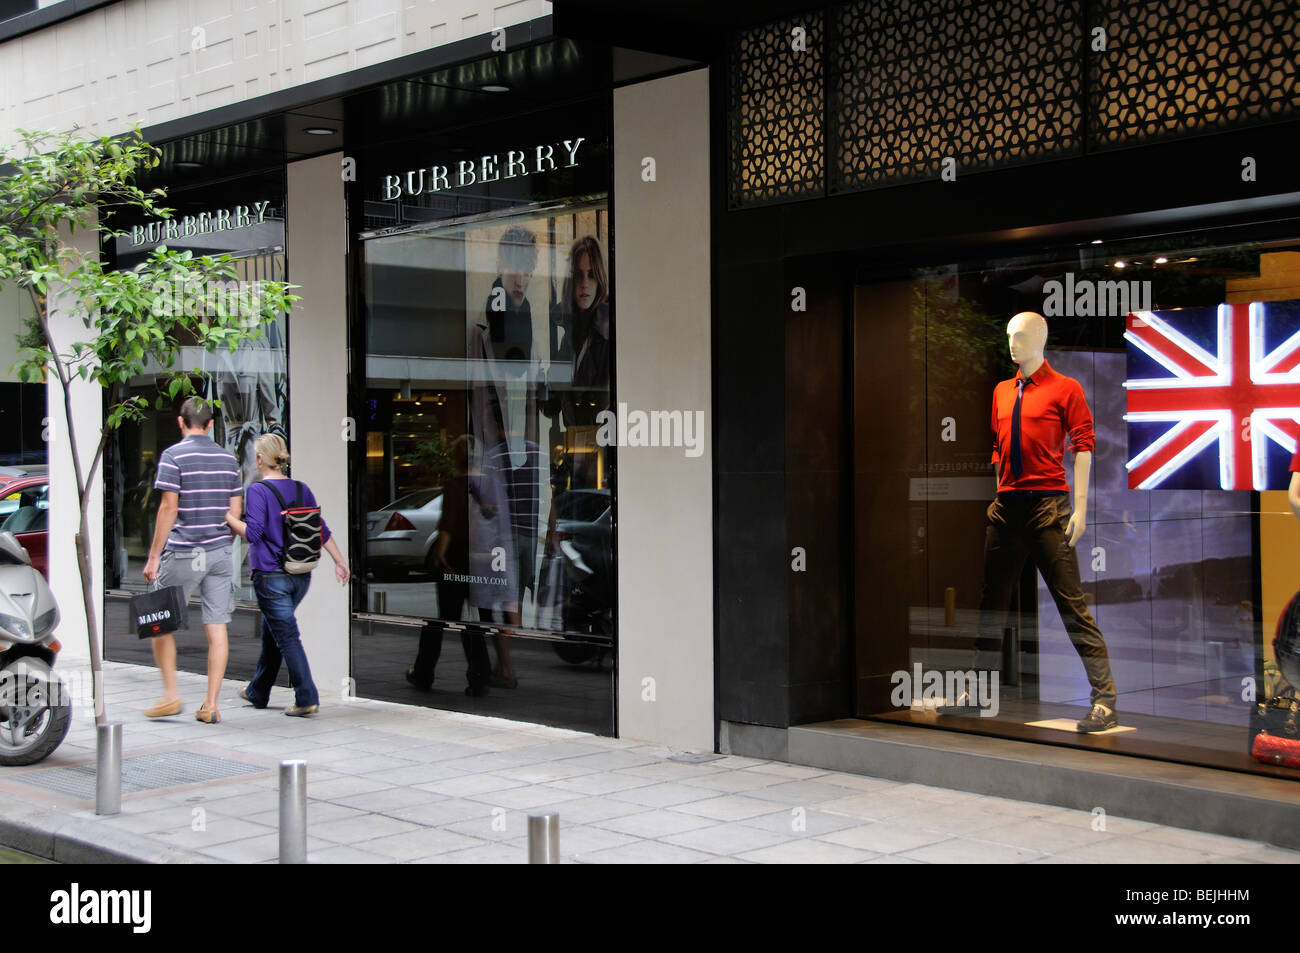 Burberry store in Thessaloniki city centre northern Greece Stock Photo -  Alamy